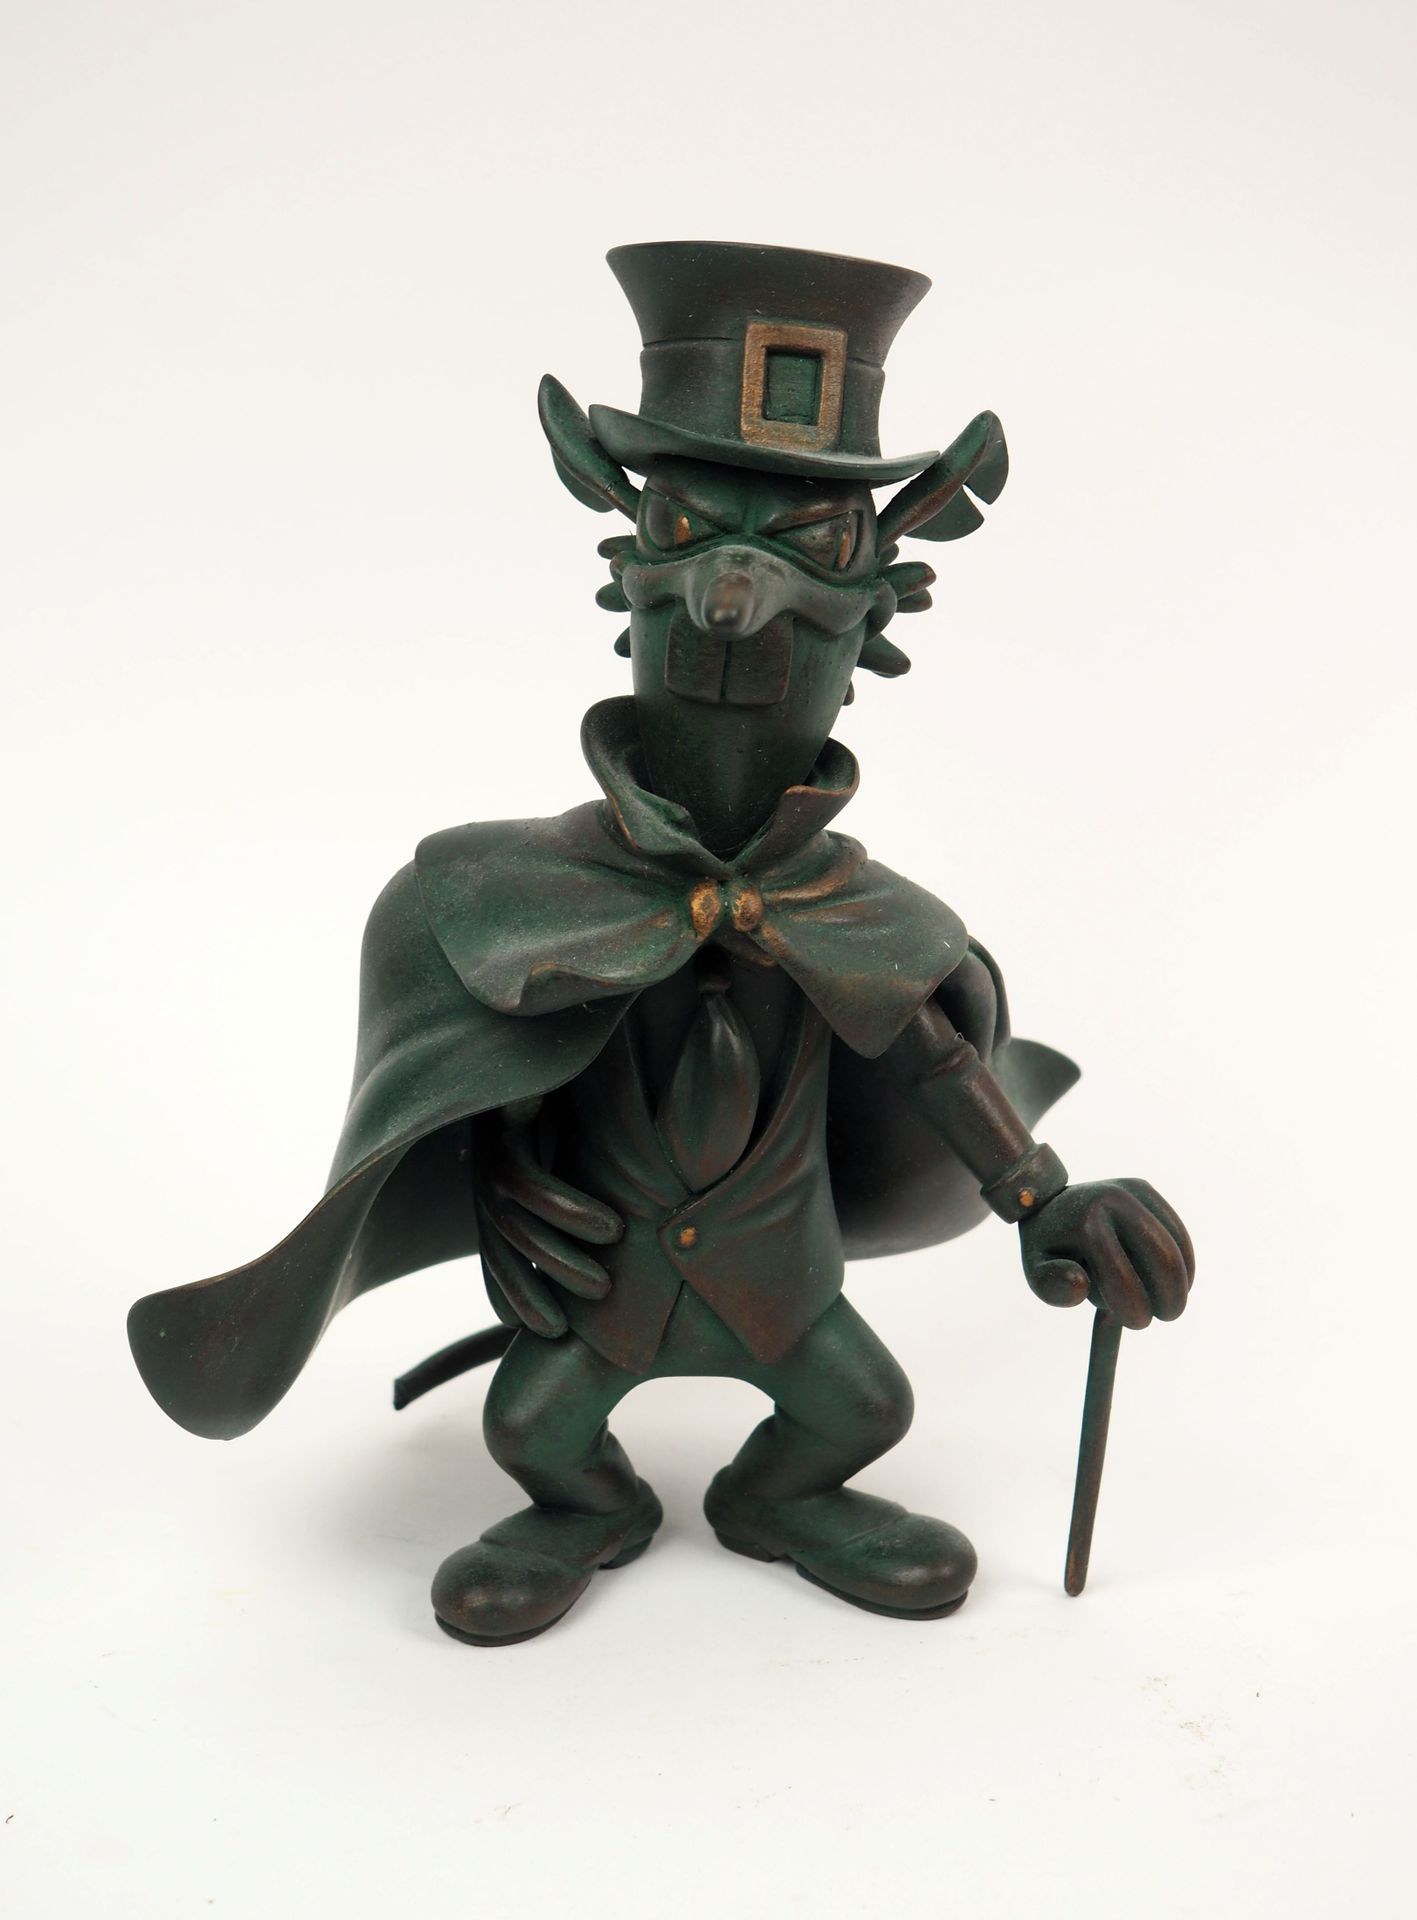 Null MACHEROT
Chlorophylle
Figurine in bronze representing Anthracite, edited by&hellip;